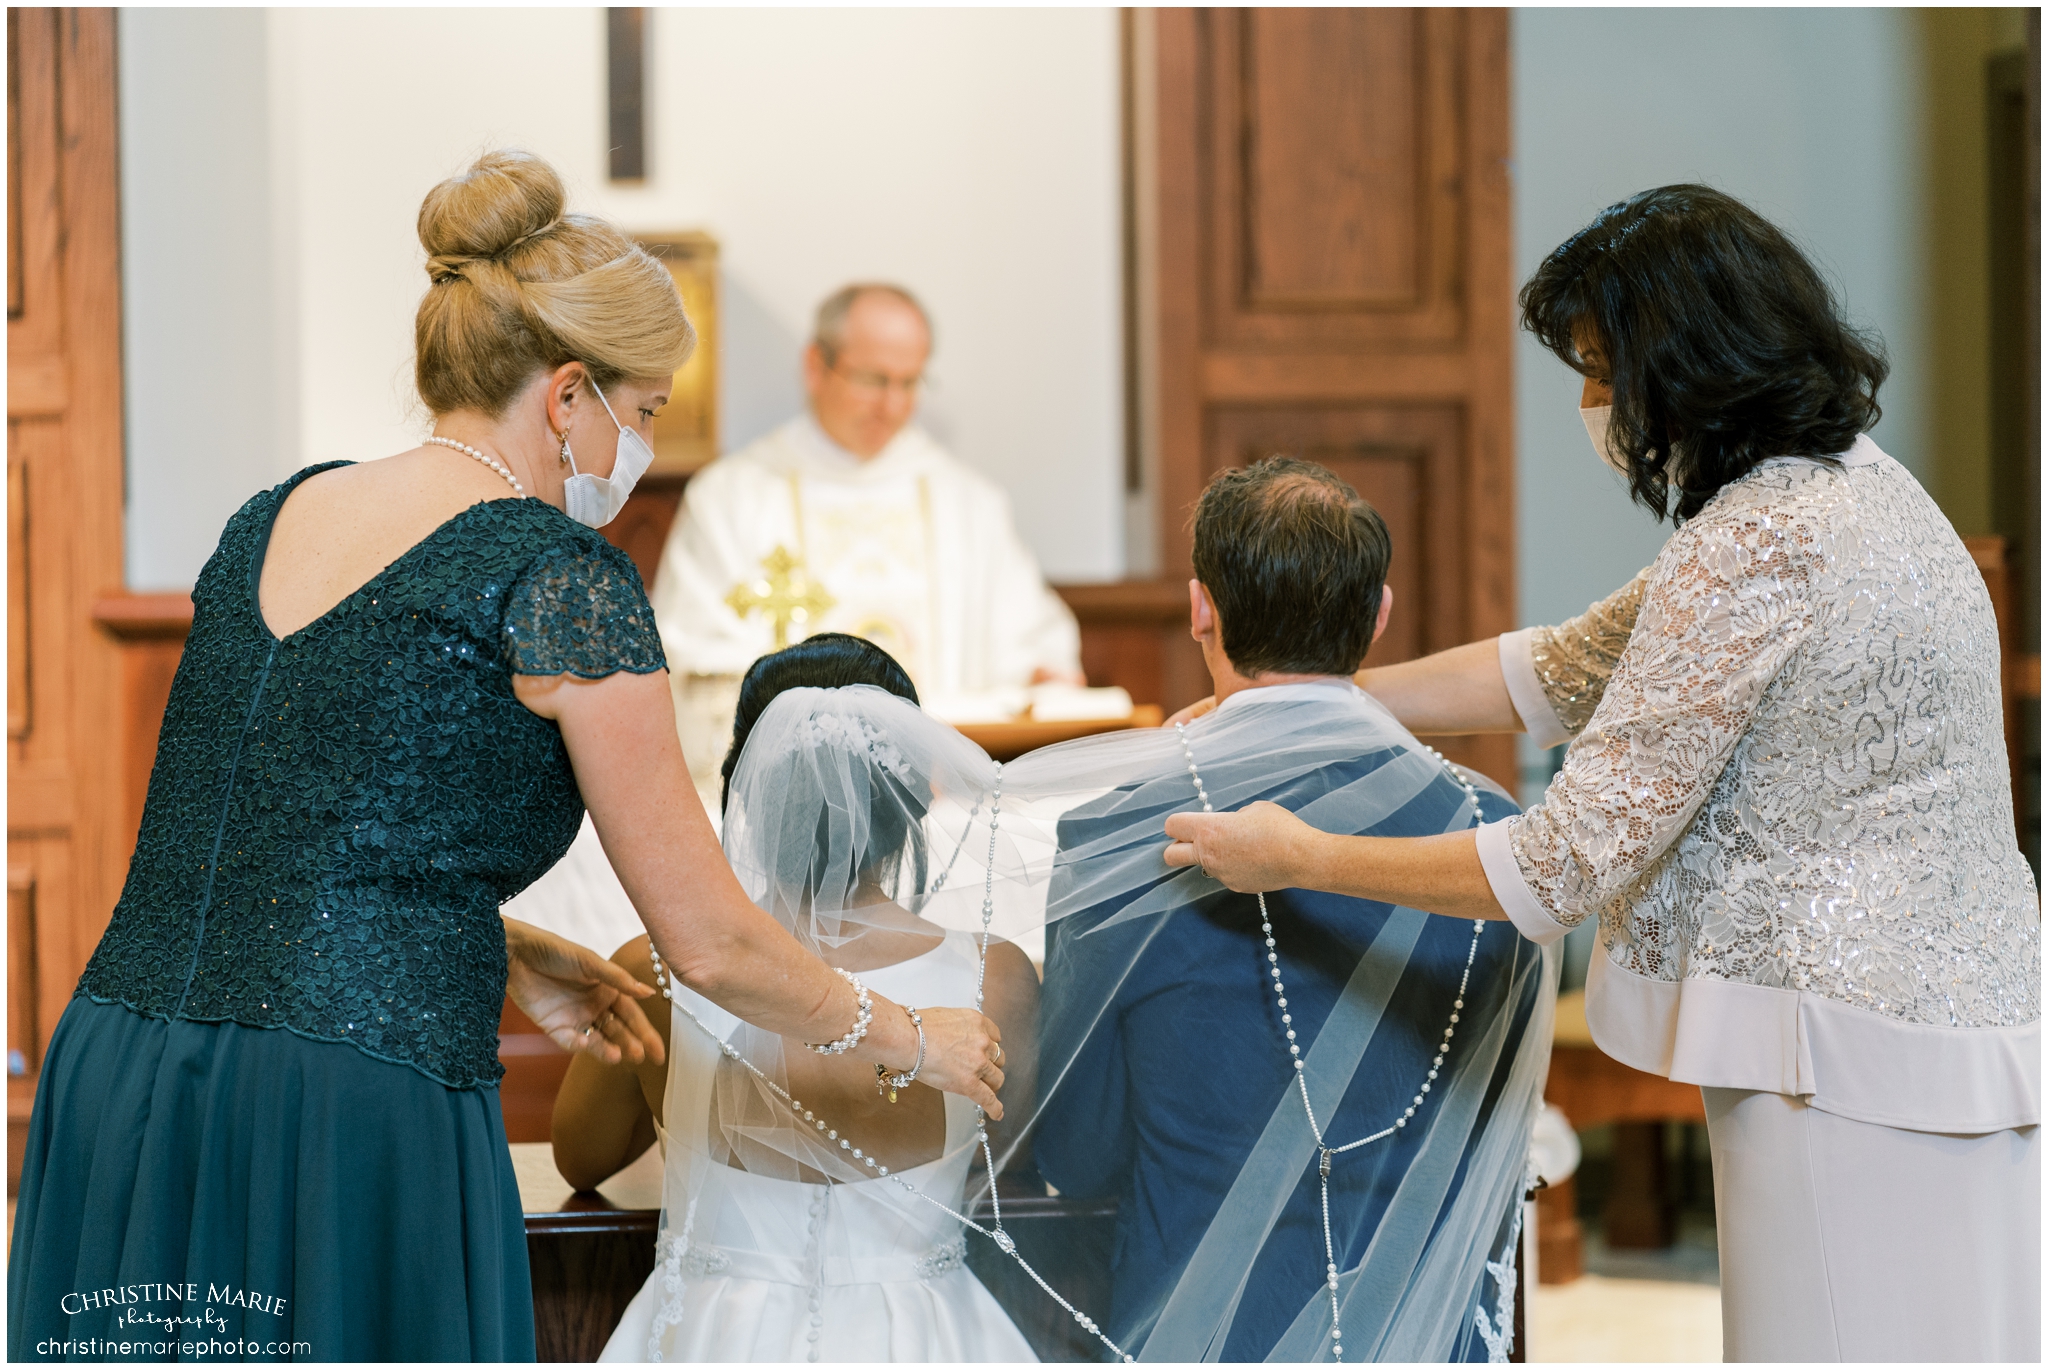 catholic traditions, laying the rosary around bride and groom